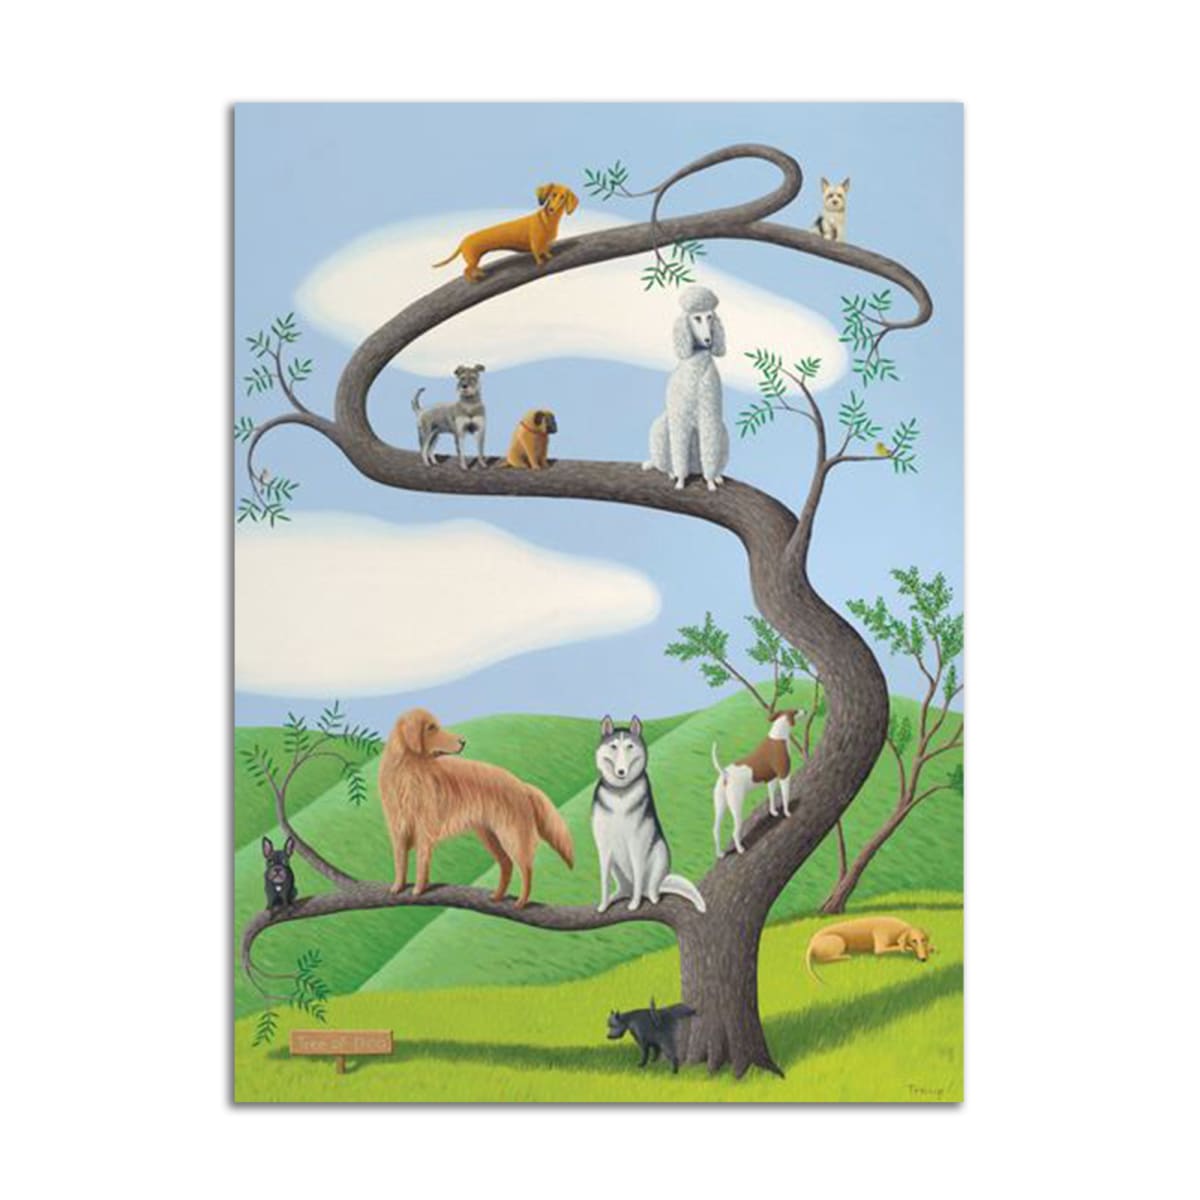 Tree of Dog by Jane Troup 